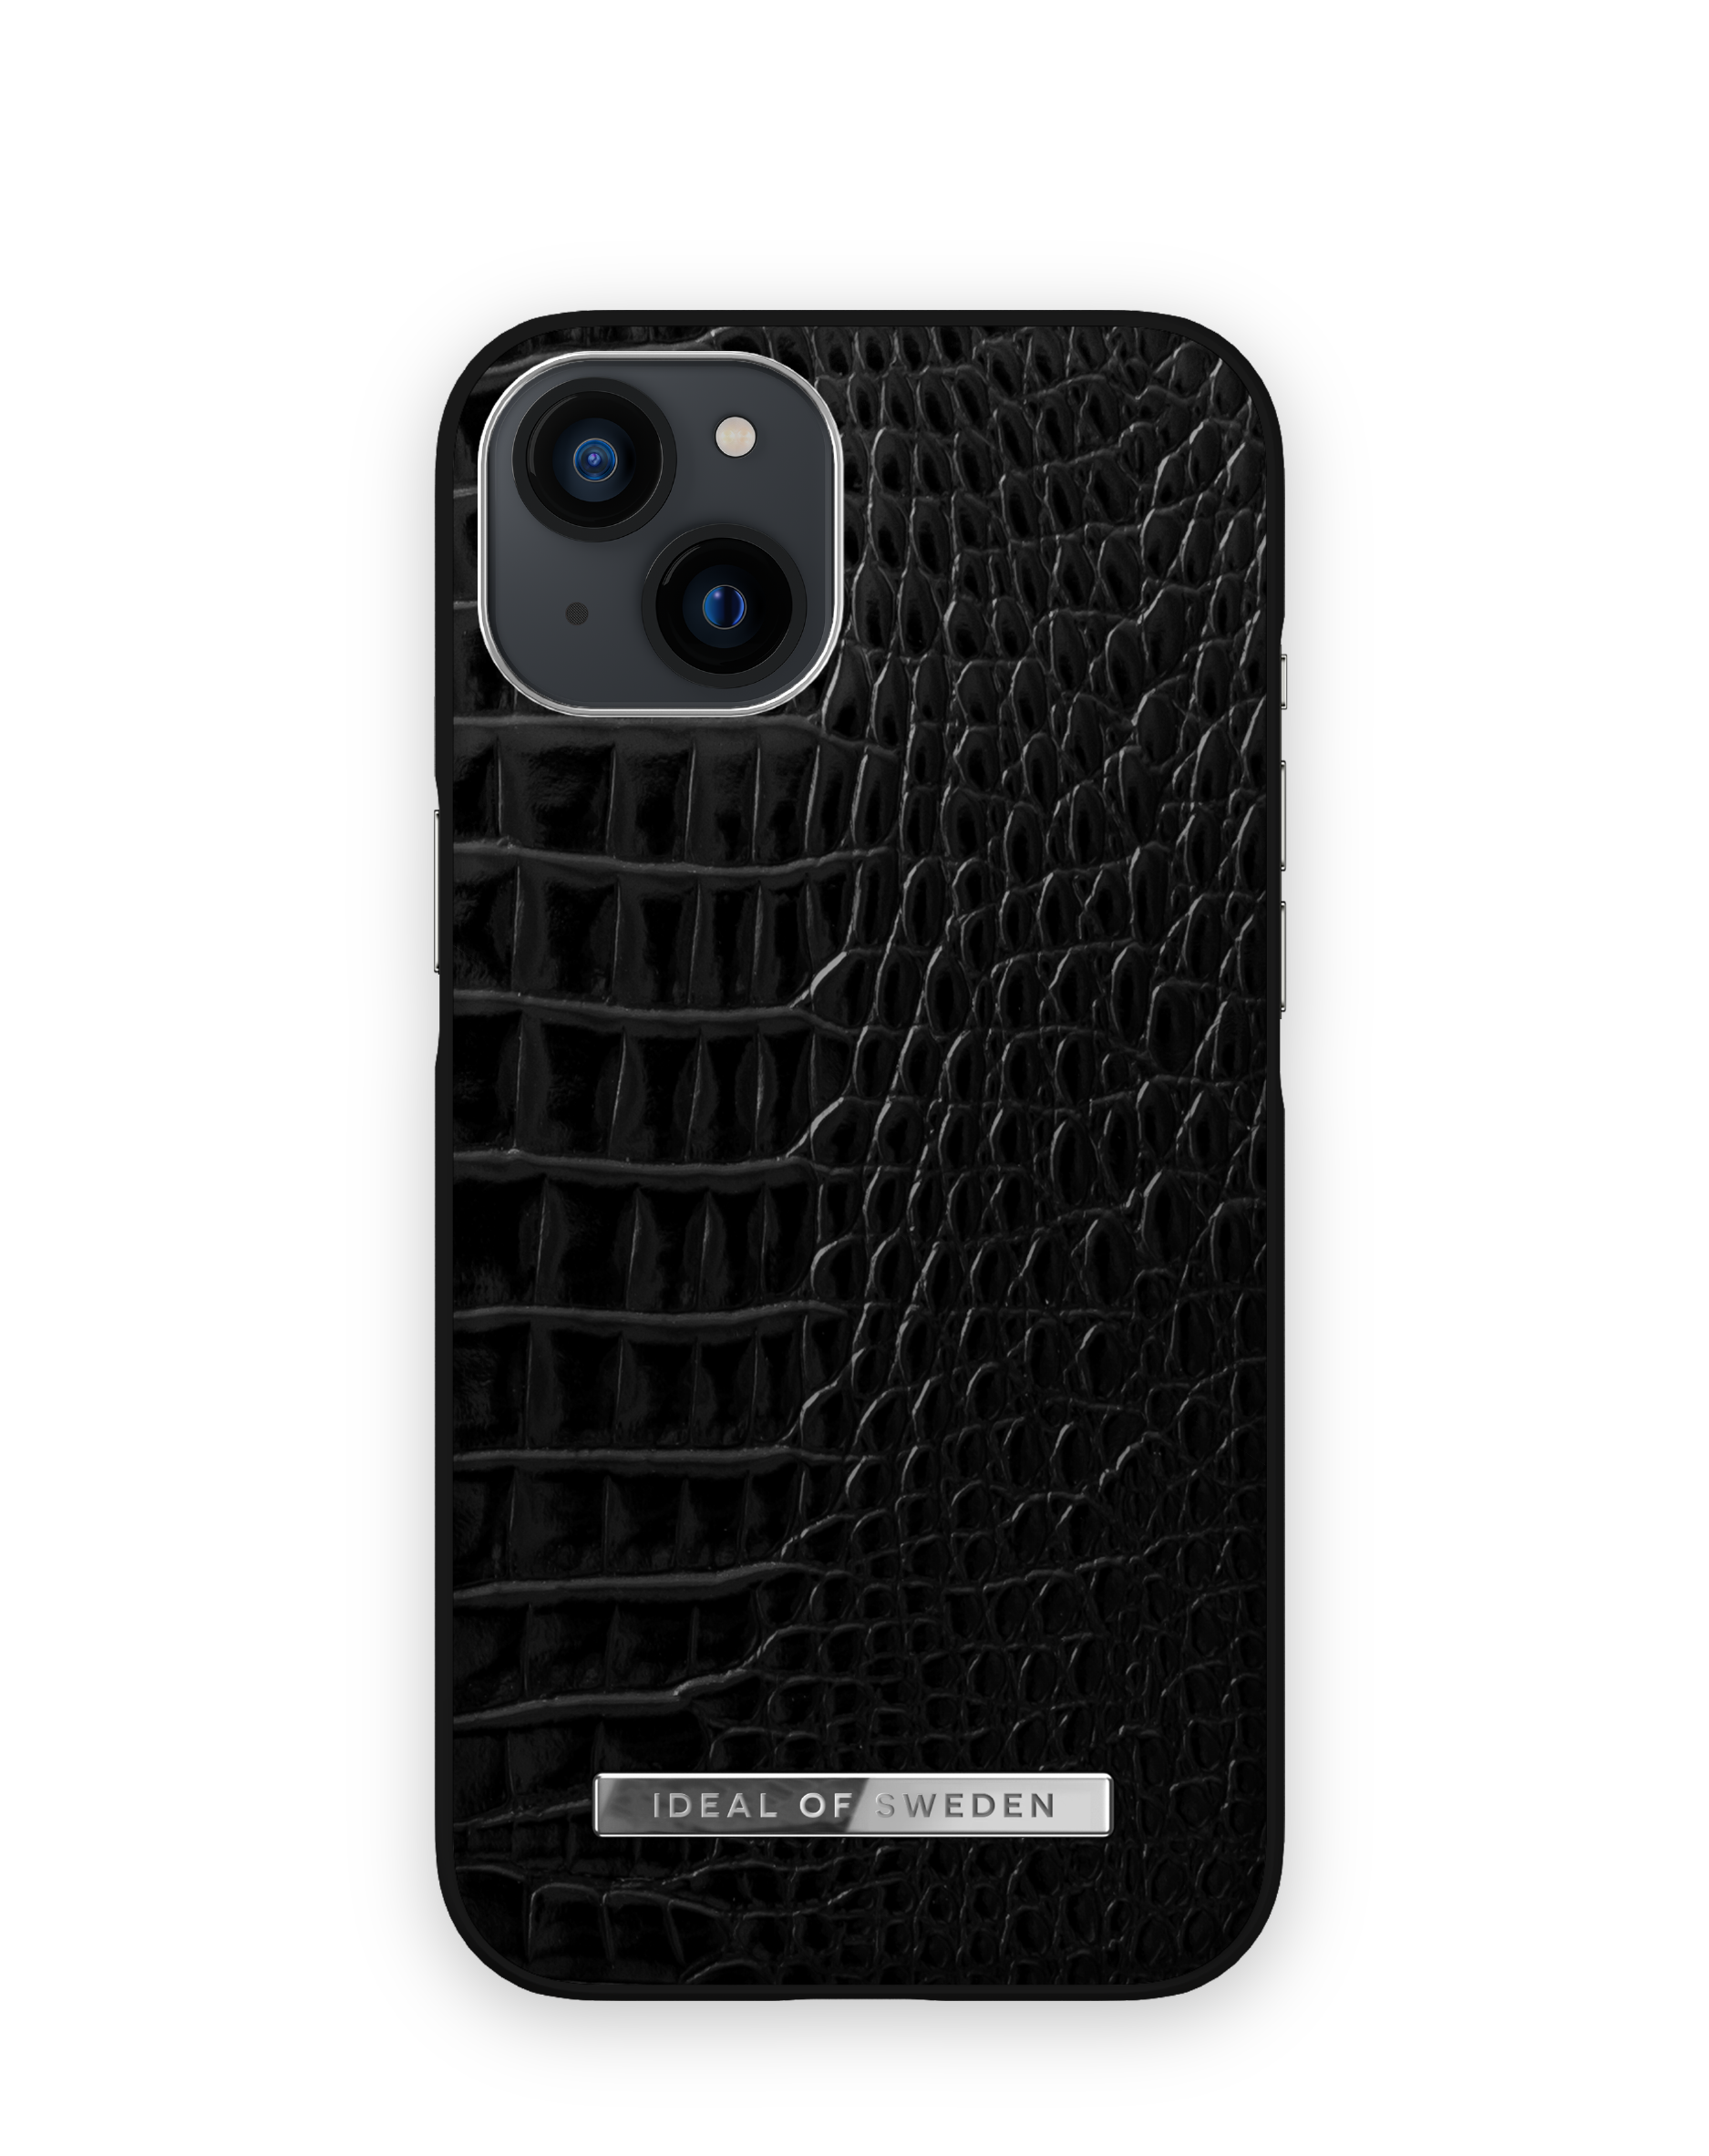 IDACSS22-I2161-306, Apple, Noir Croco iPhone Recycled Backcover, SWEDEN IDEAL 13, - OF Silver Neo